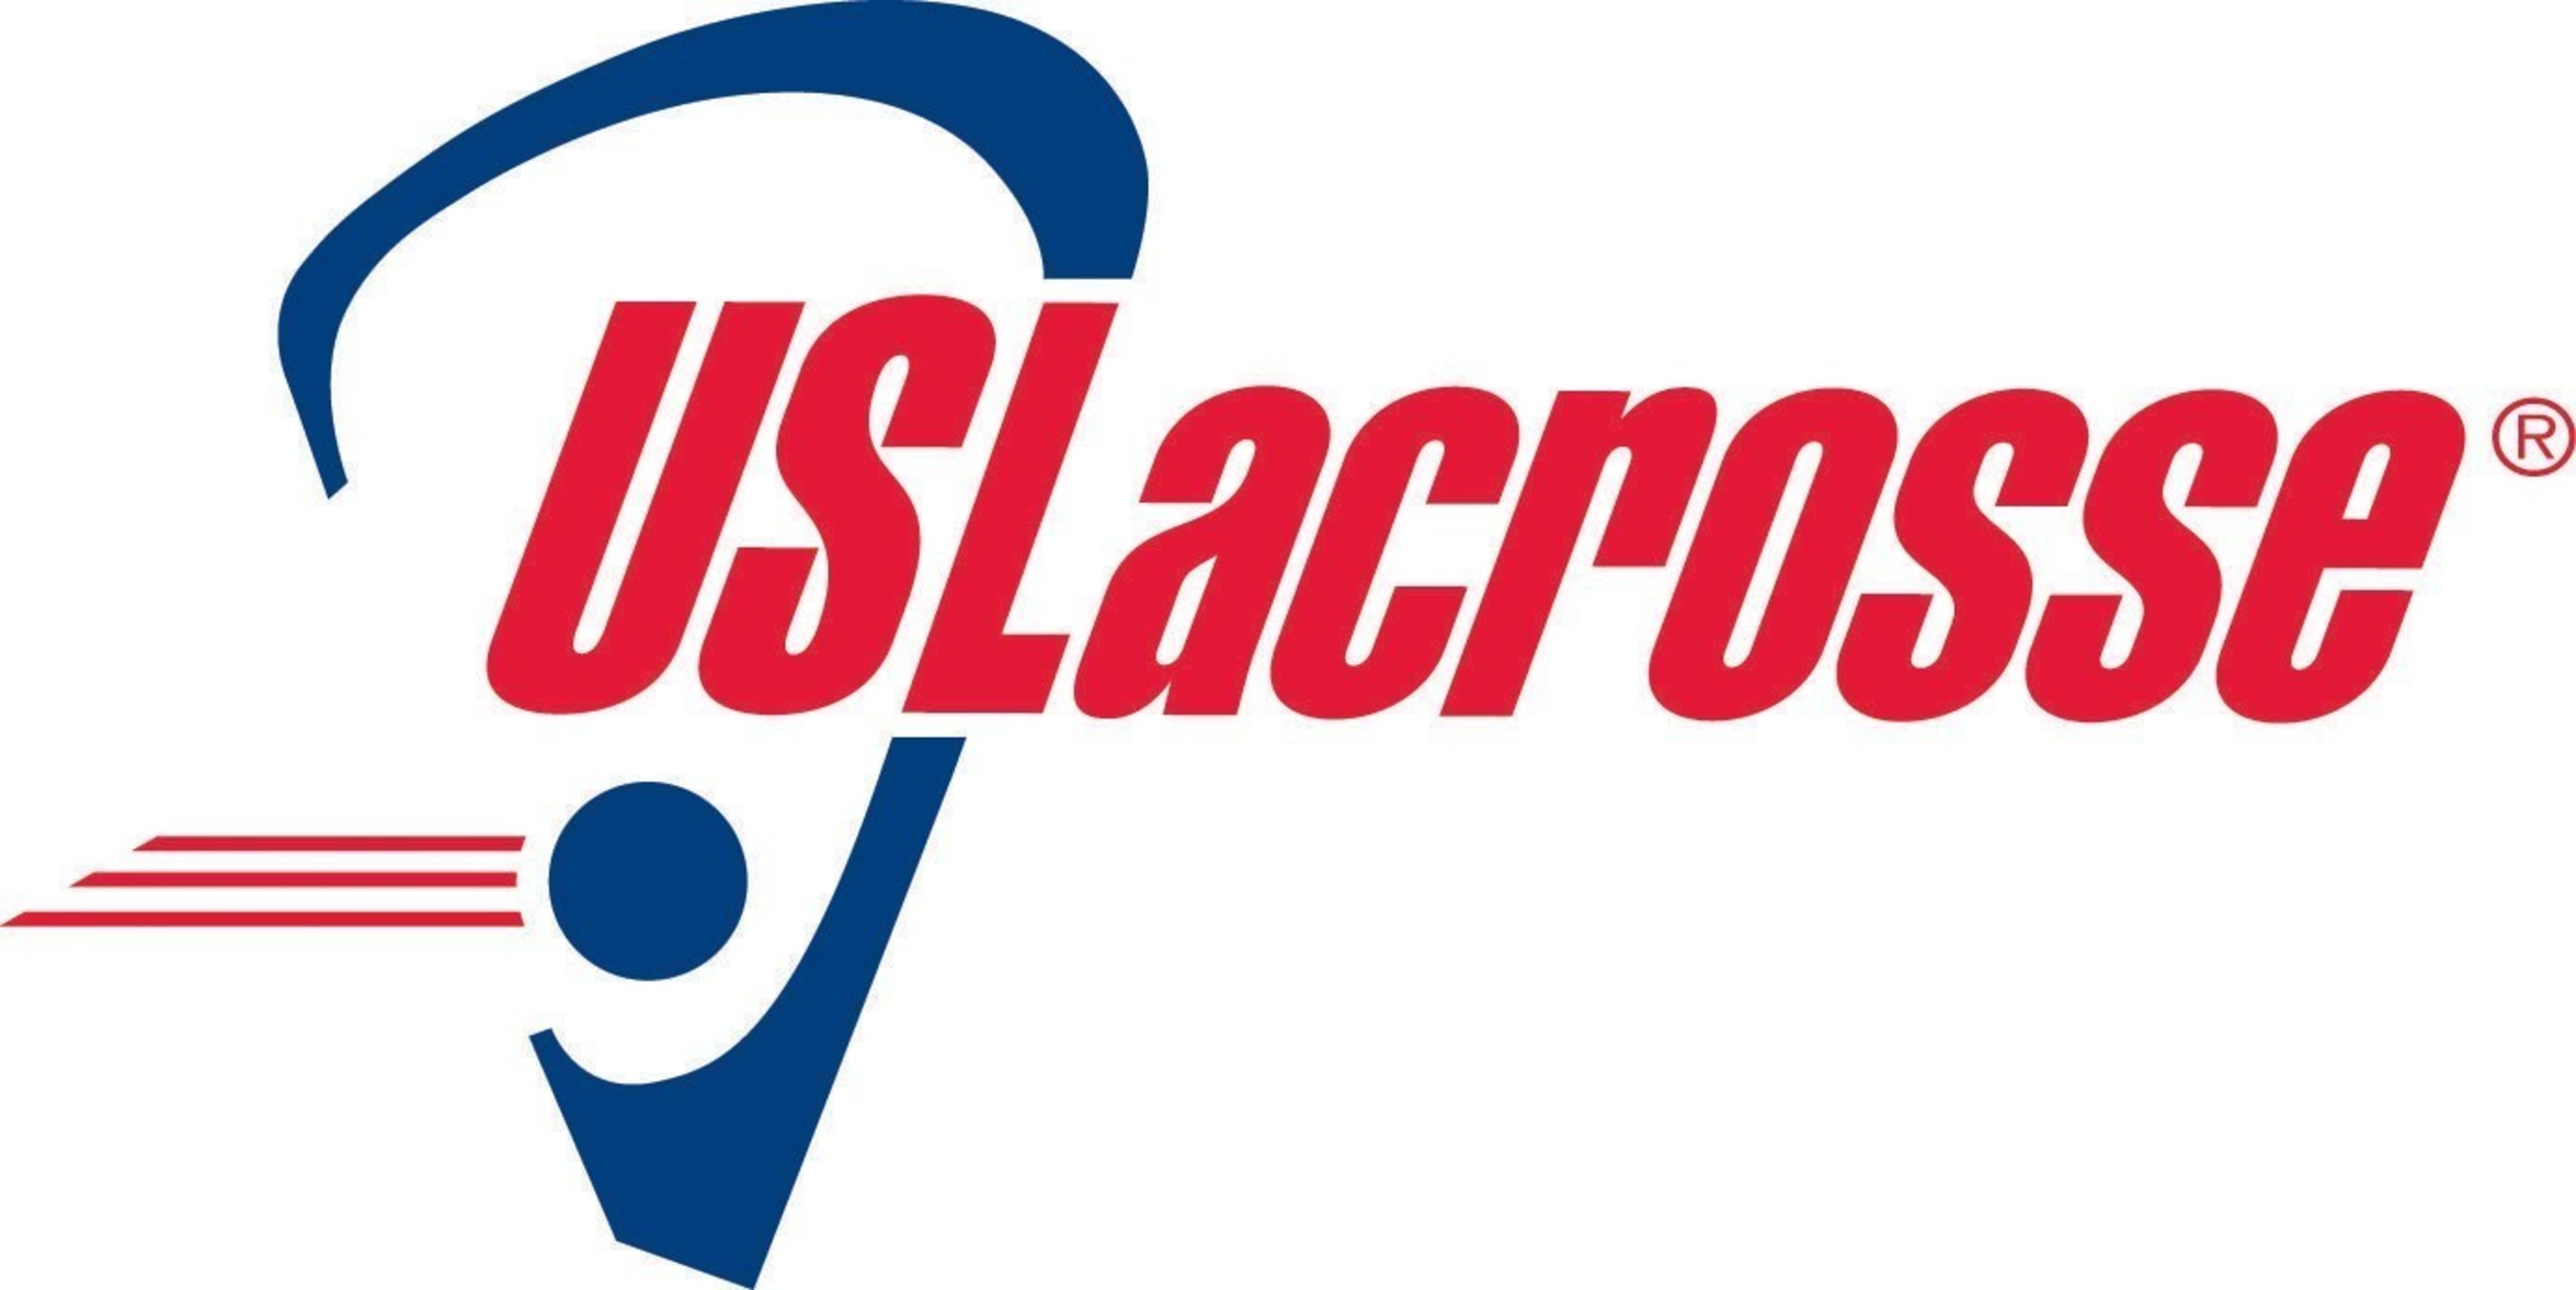 US Lacrosse names GreenFields as Official Artificial Turf Partner